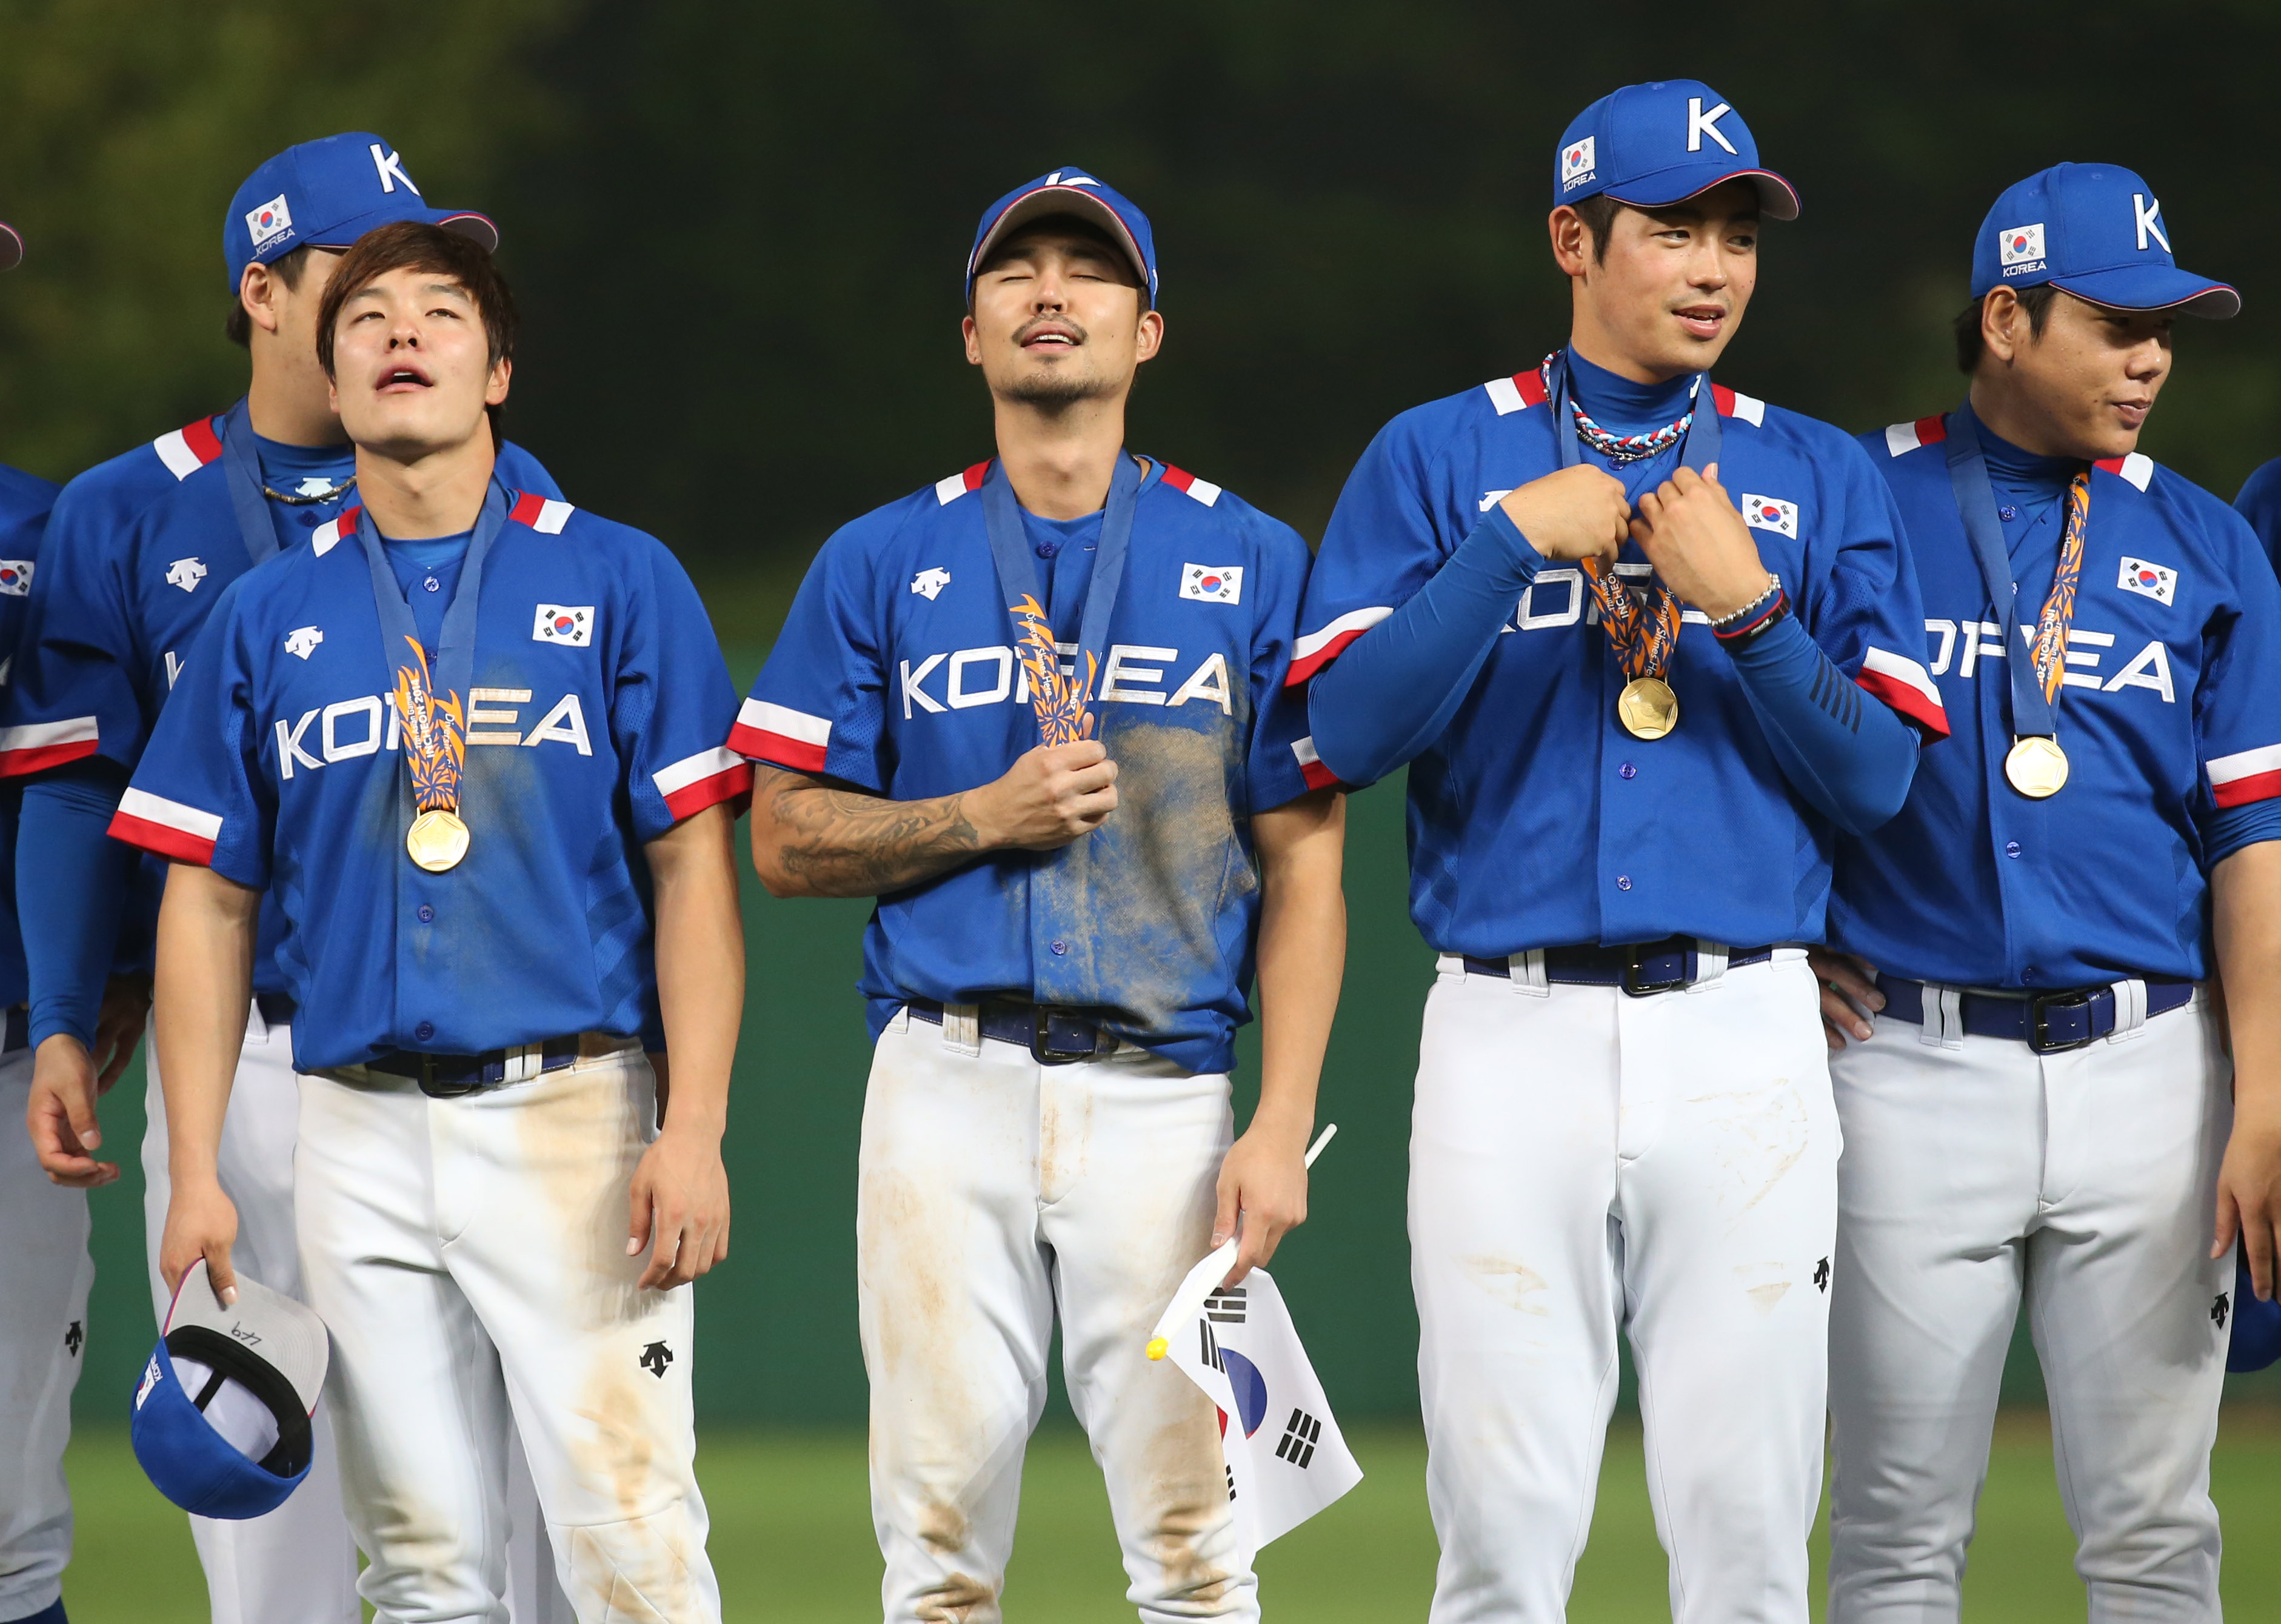 MLB to Play South Korea Games for 1st Time in 100 Years